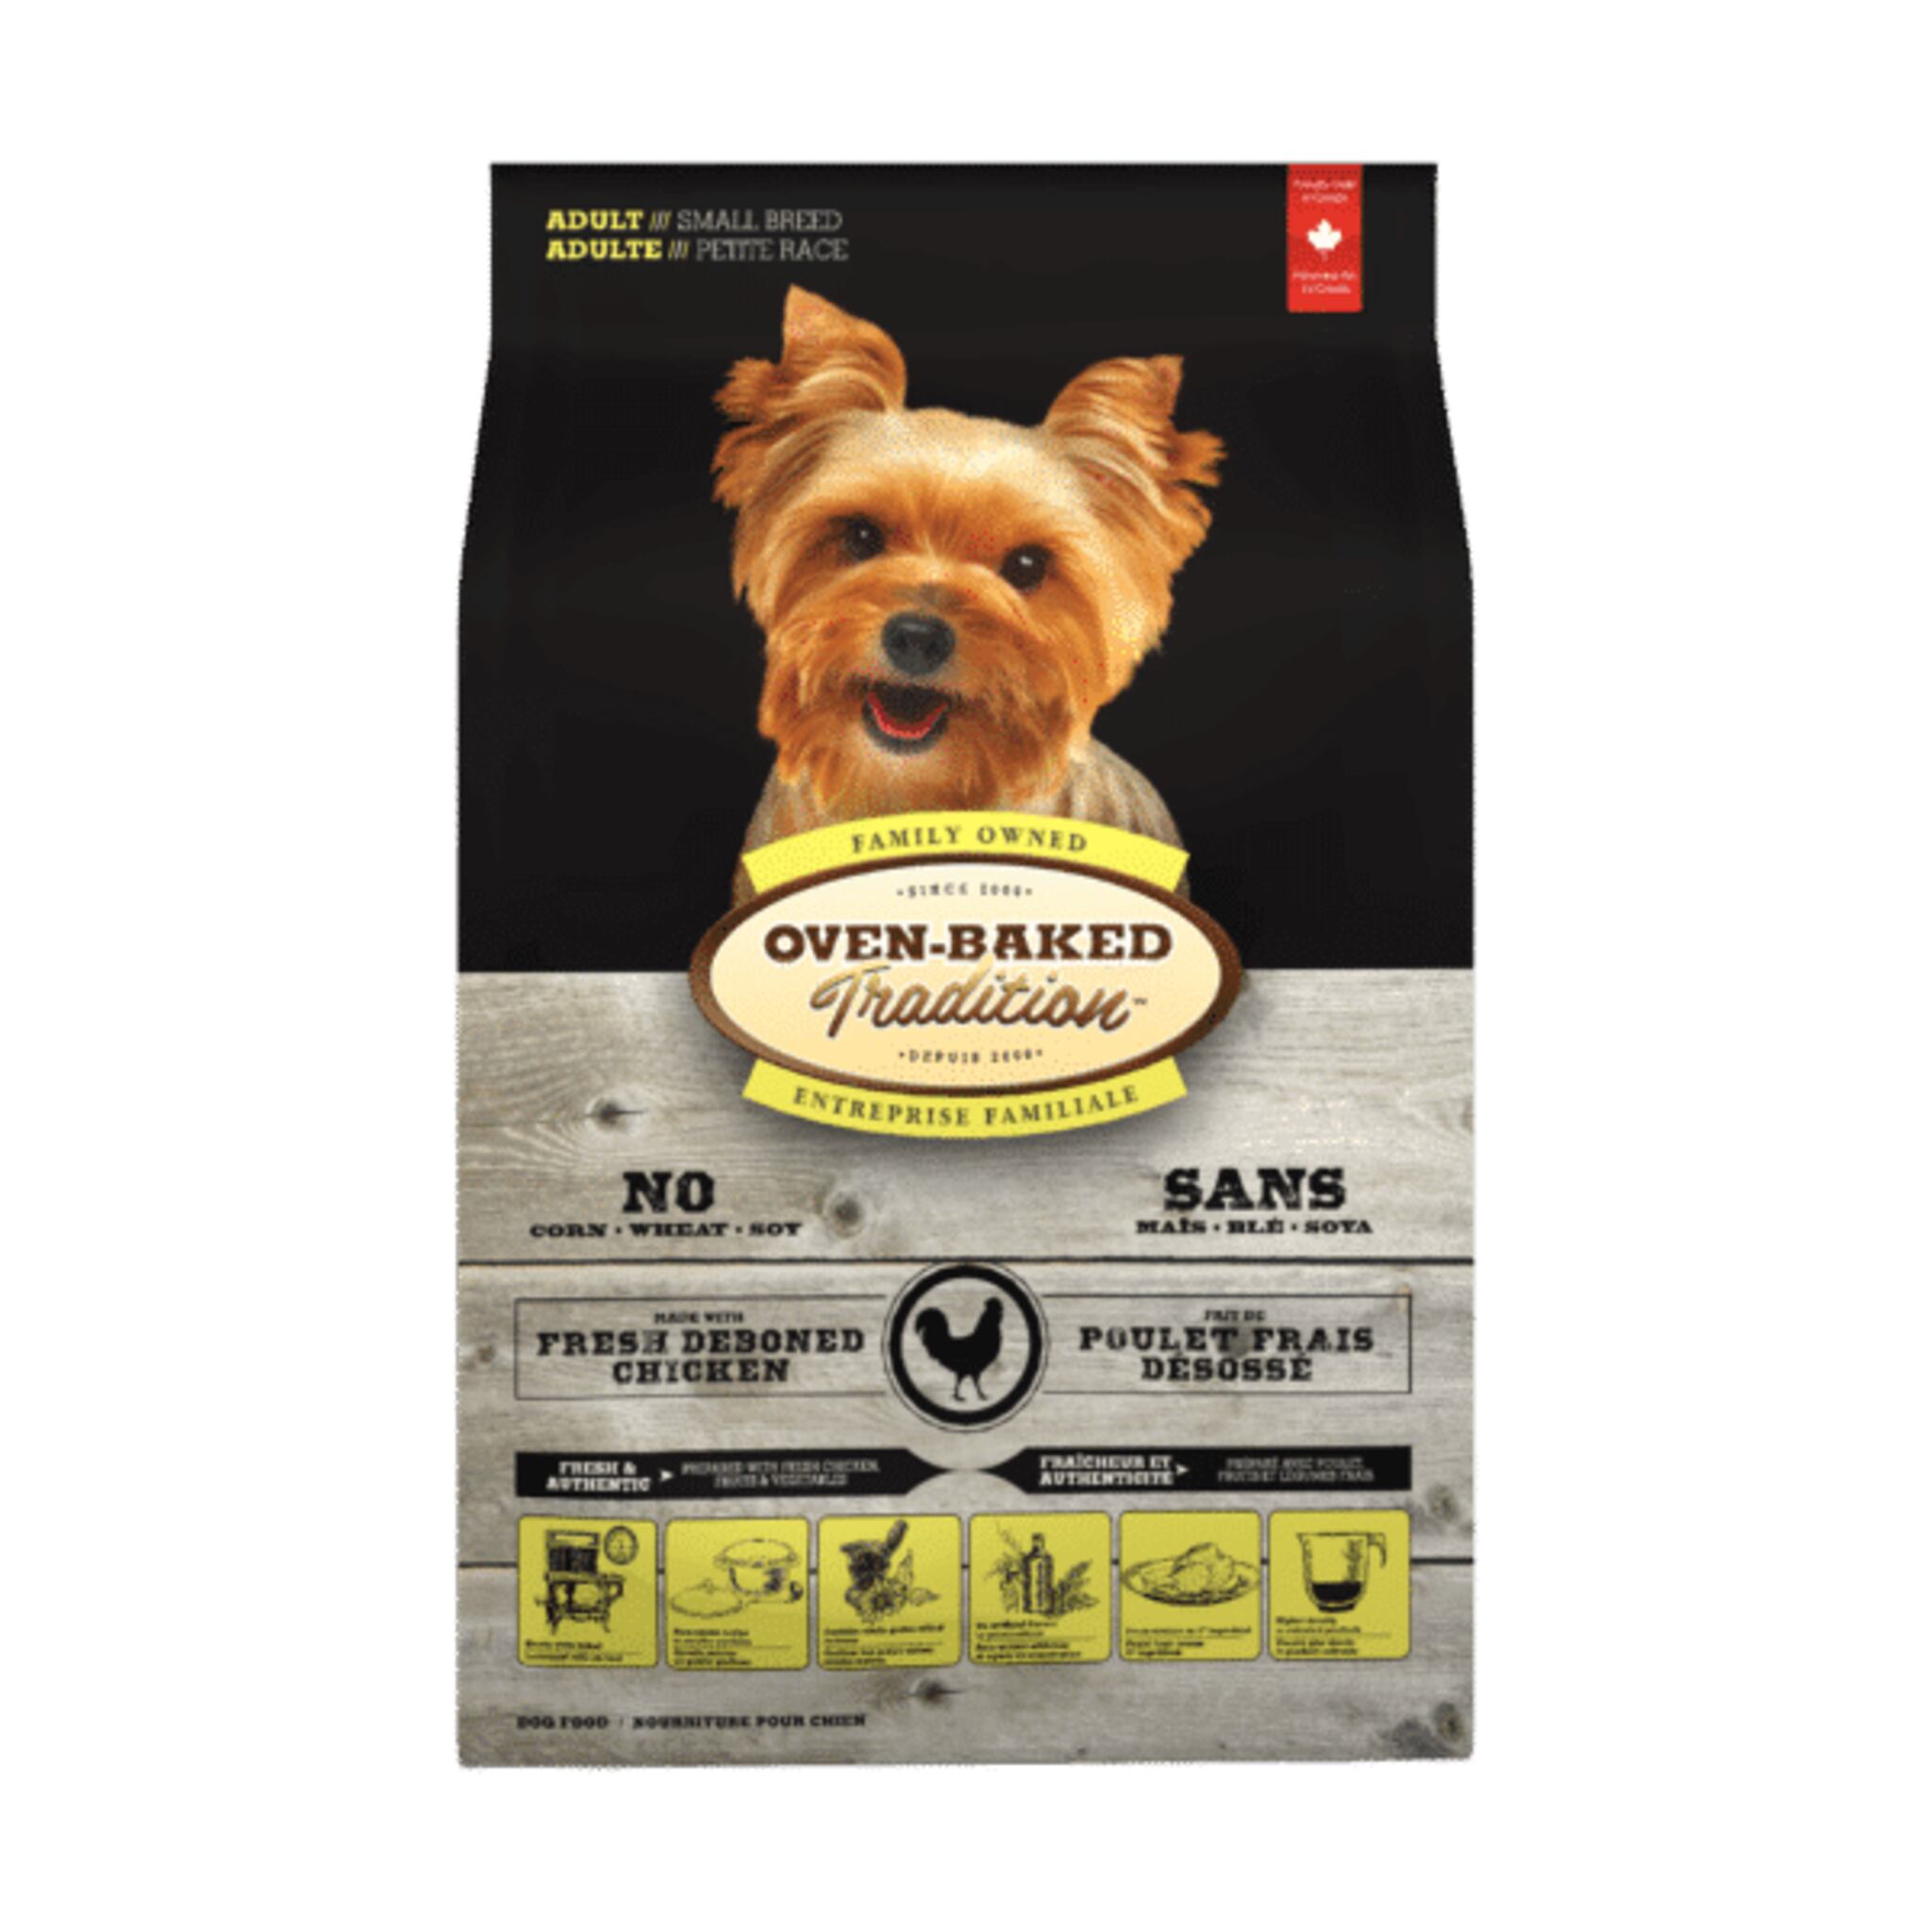 A bag of Oven-Baked Tradition Dog Food, Adult small breed, Chicken recipe, 5 lb.